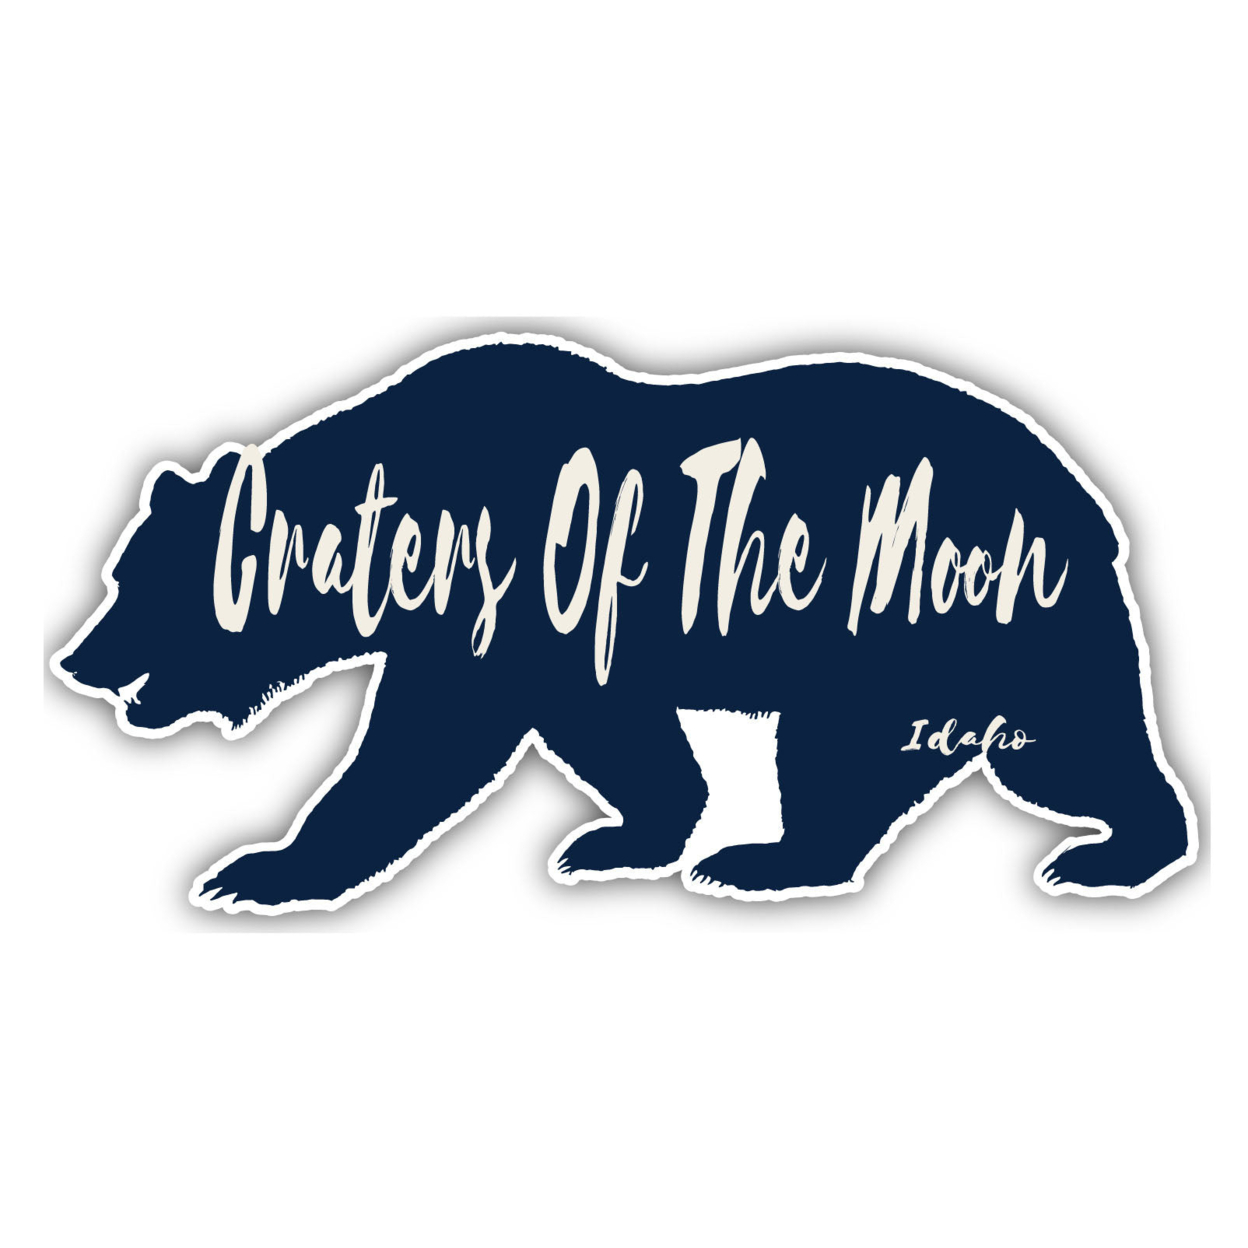 Craters Of The Moon Idaho Souvenir Decorative Stickers (Choose Theme And Size) - 4-Pack, 8-Inch, Bear